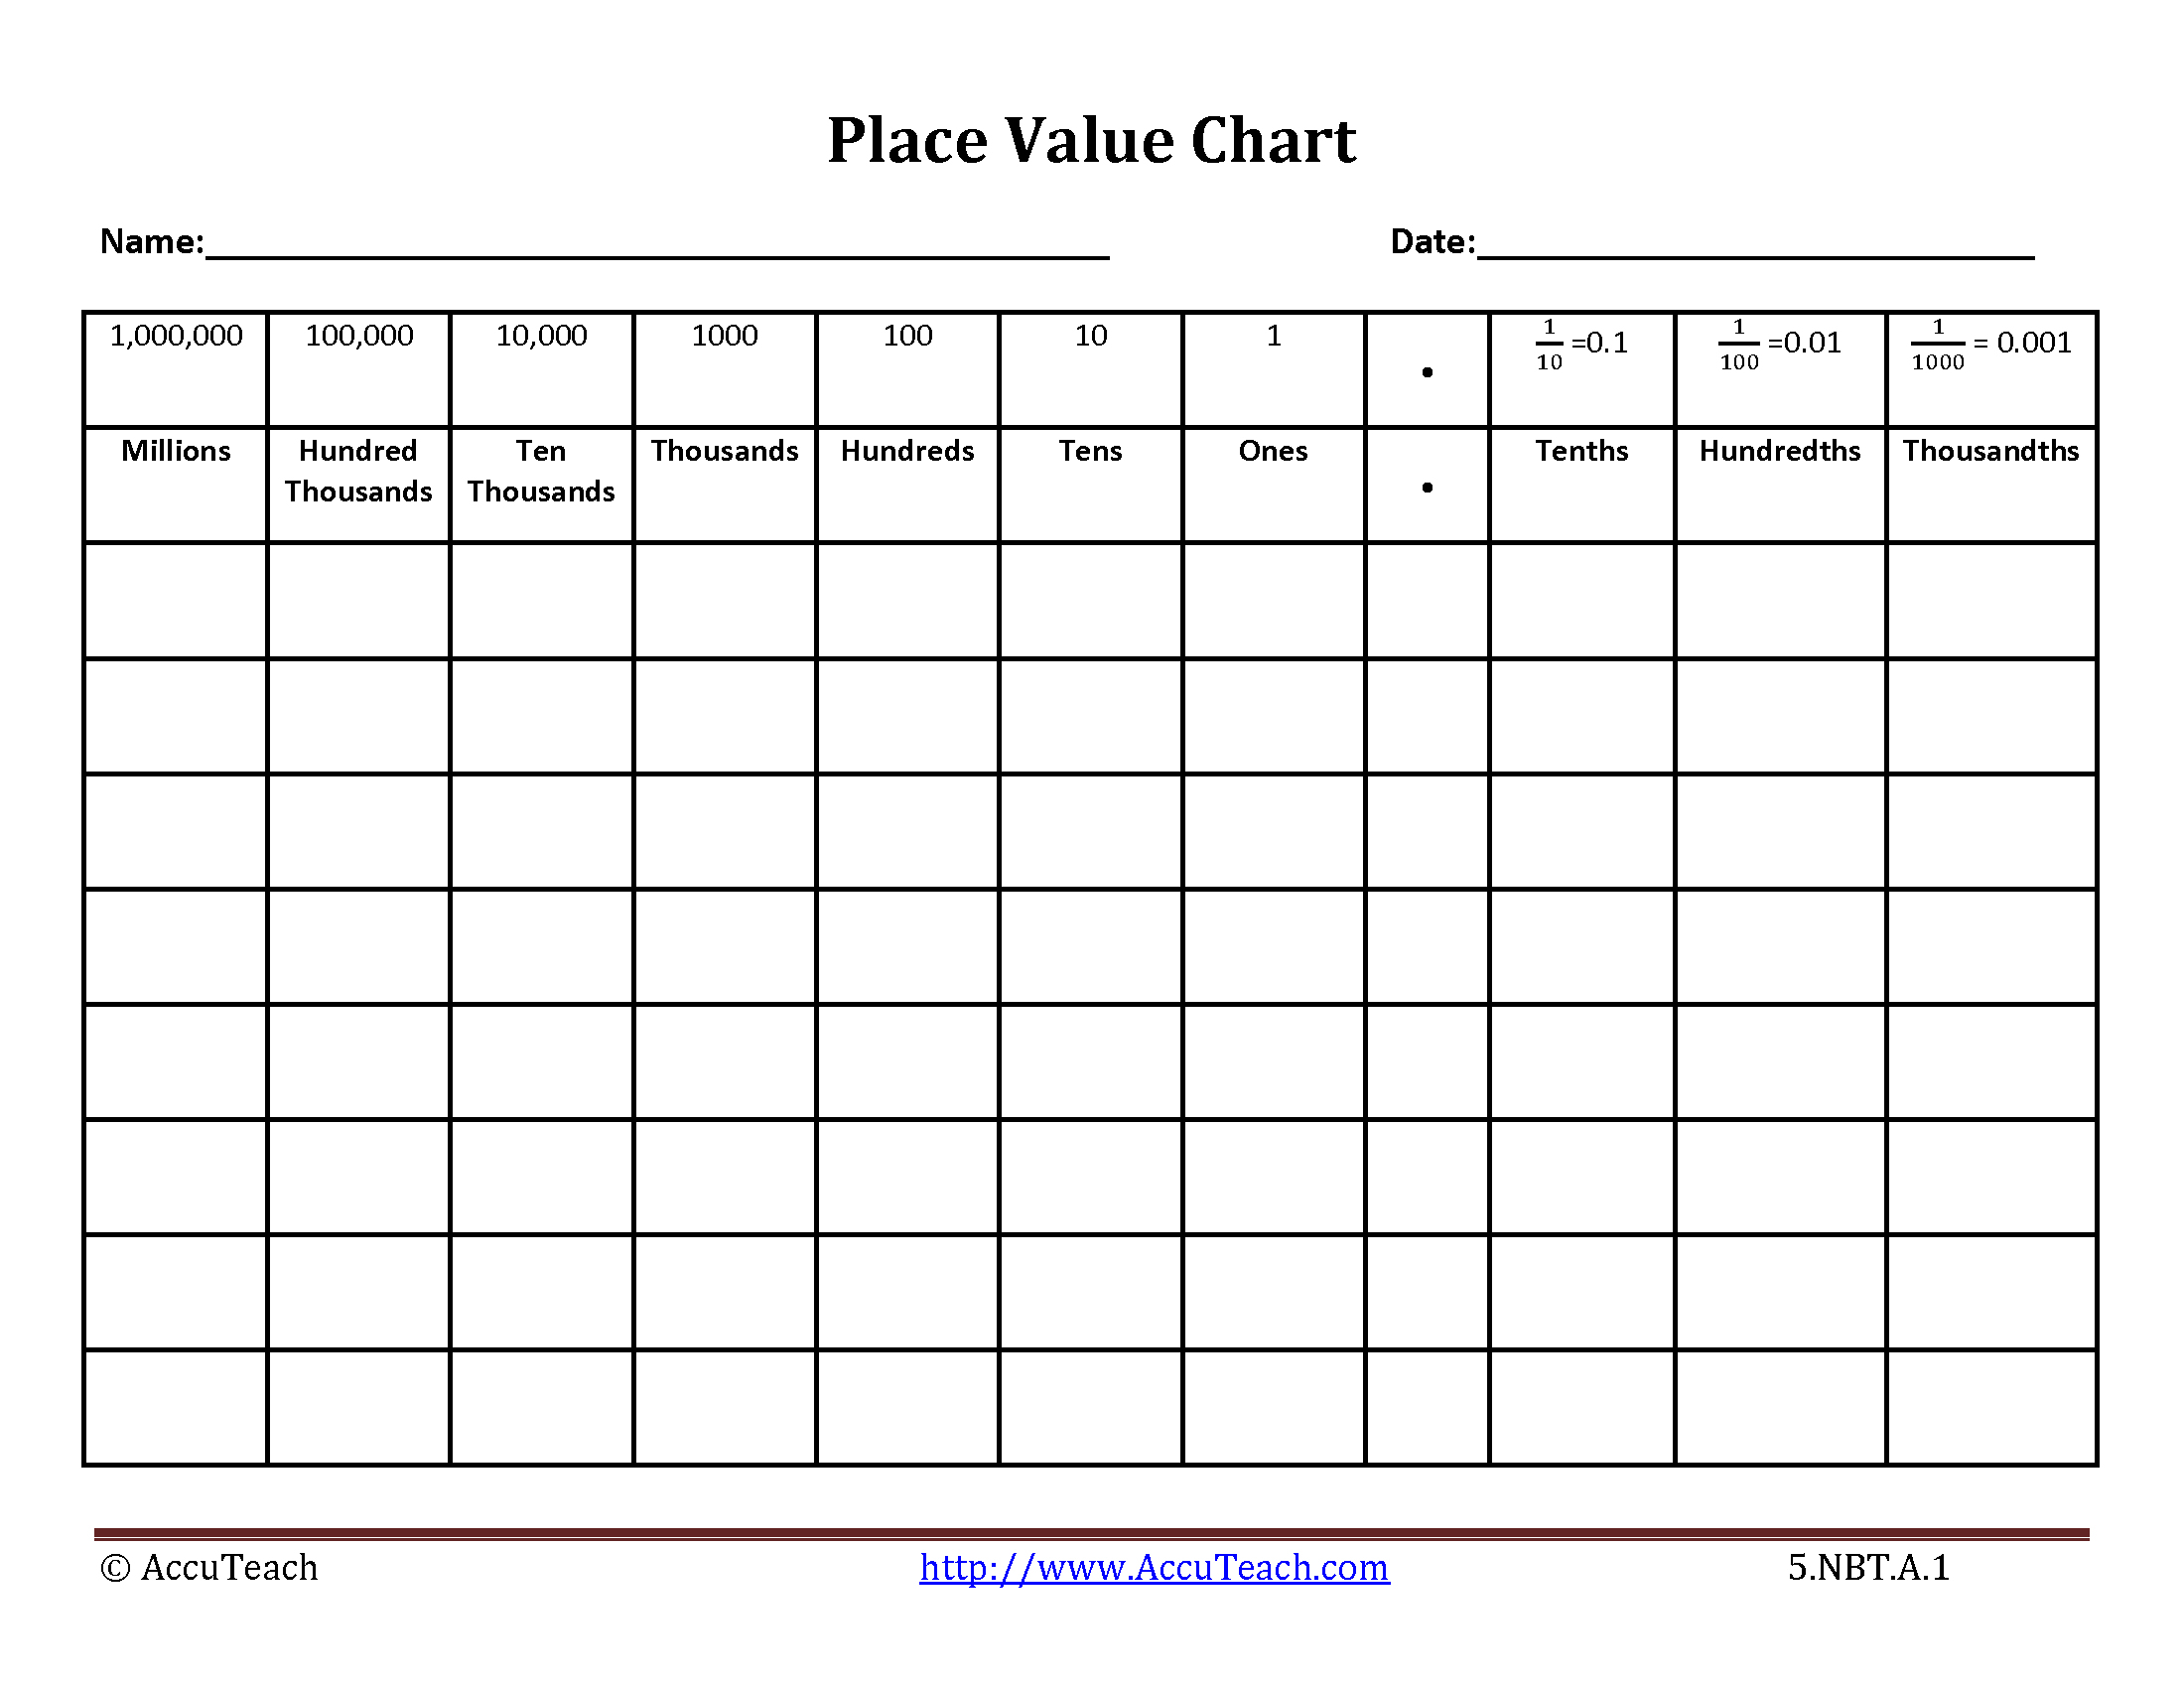 Printable Place Value Chart With Decimals - Home Design Ideas - Home - Free Printable Place Value Chart